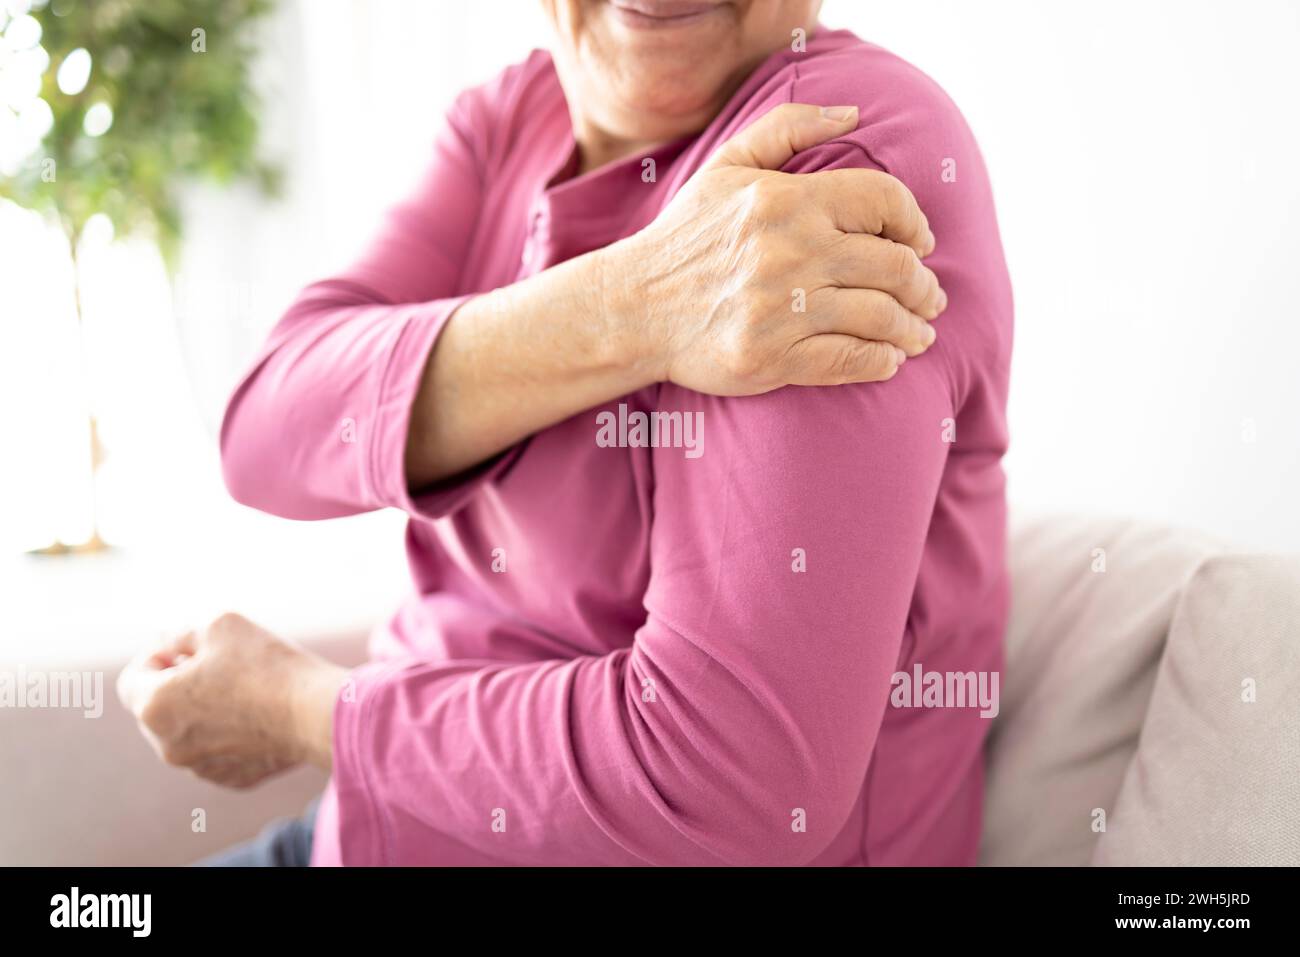 Senior woman suffers from shoulder joint pain, shoulder stiffness or osteoporosis Stock Photo